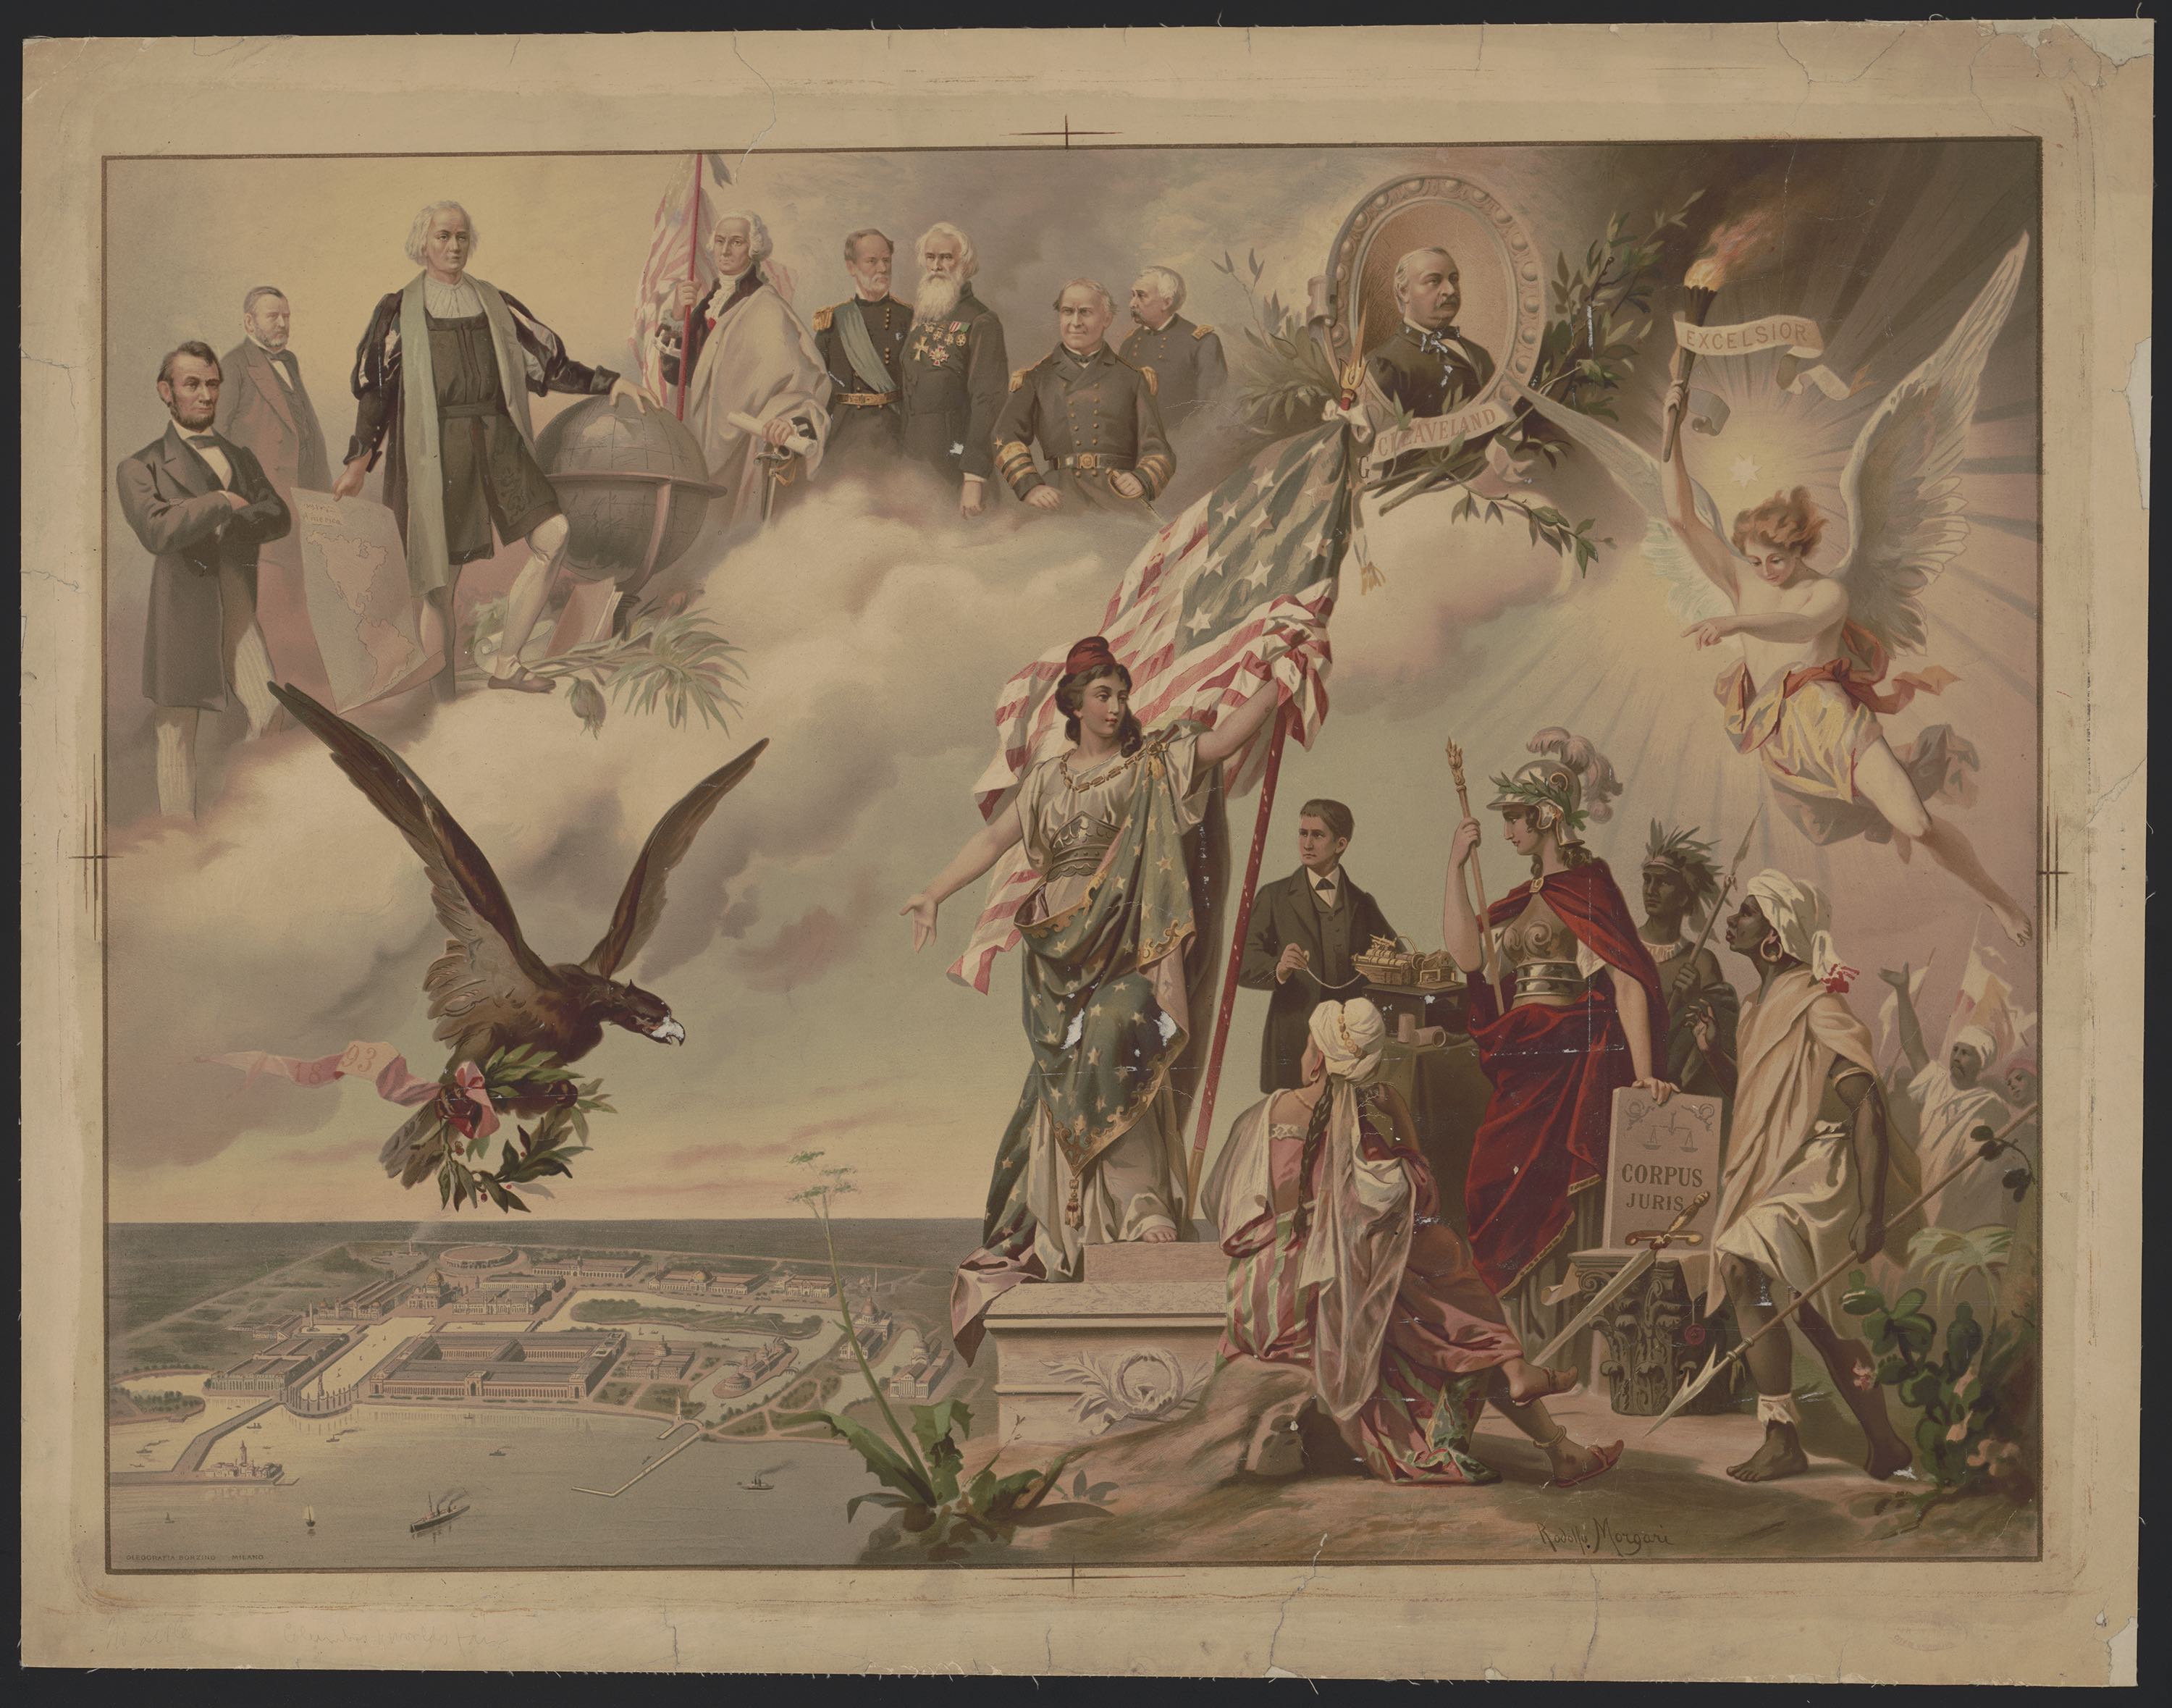 Depiction of Chicago World’s Fair with Allegorical Figures, 1893. Image from Library of Congress, Prints & Photographs Division, [LC-DIG-ppmsca-44793]  (No known restrictions on publication).